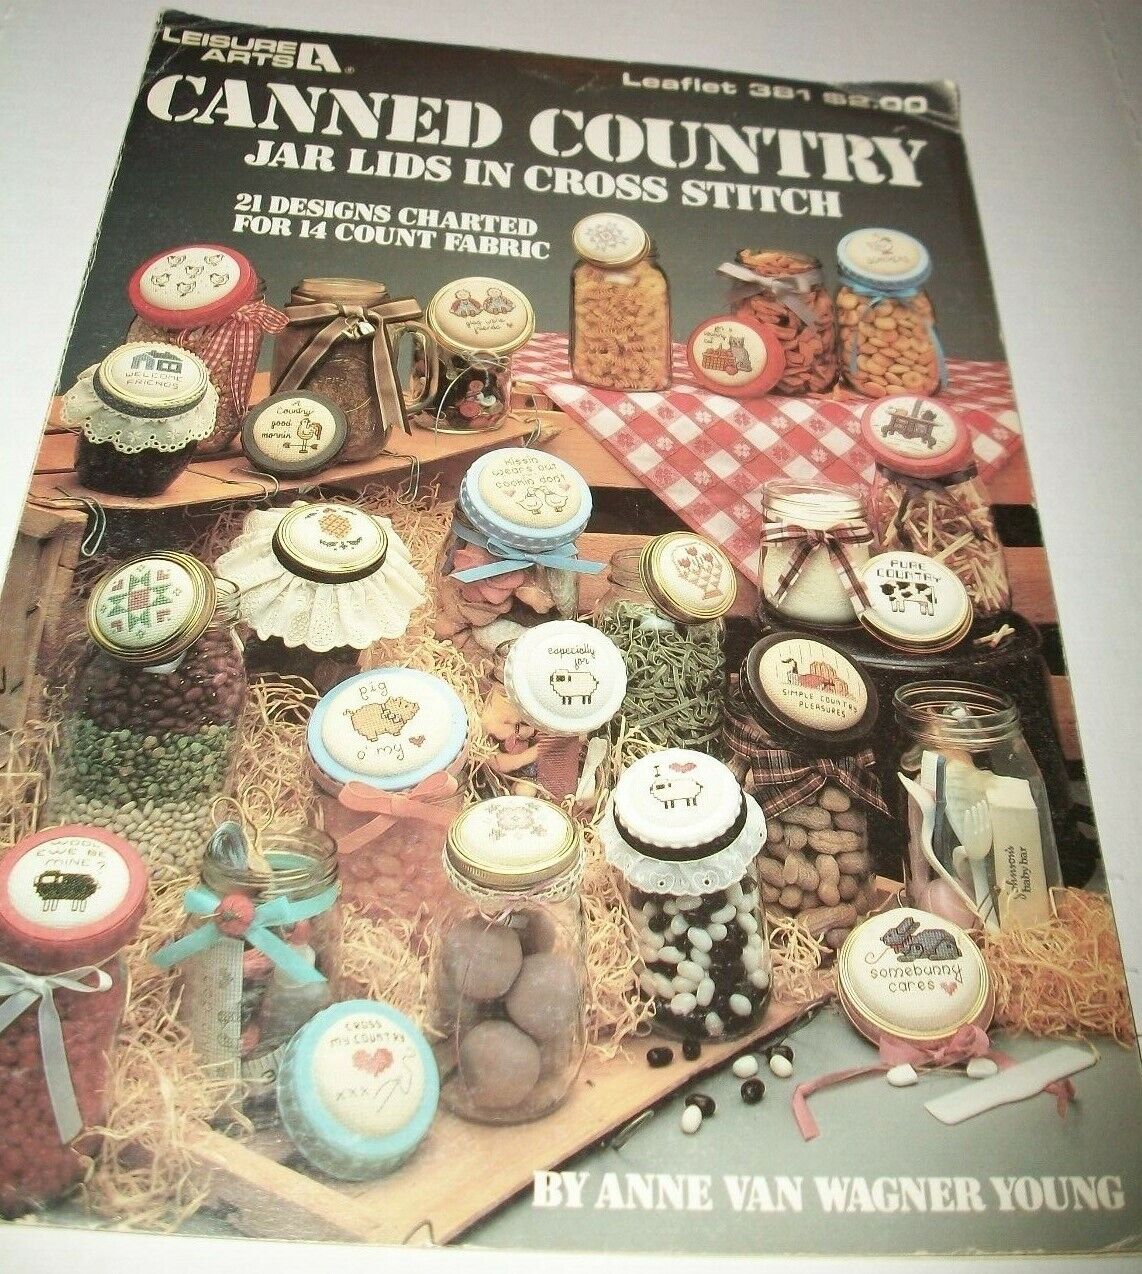 LA COUNTED CROSS STITCH JAR LIDS CANNED COUNTRY #381 PATTERN LEAFLET 1985